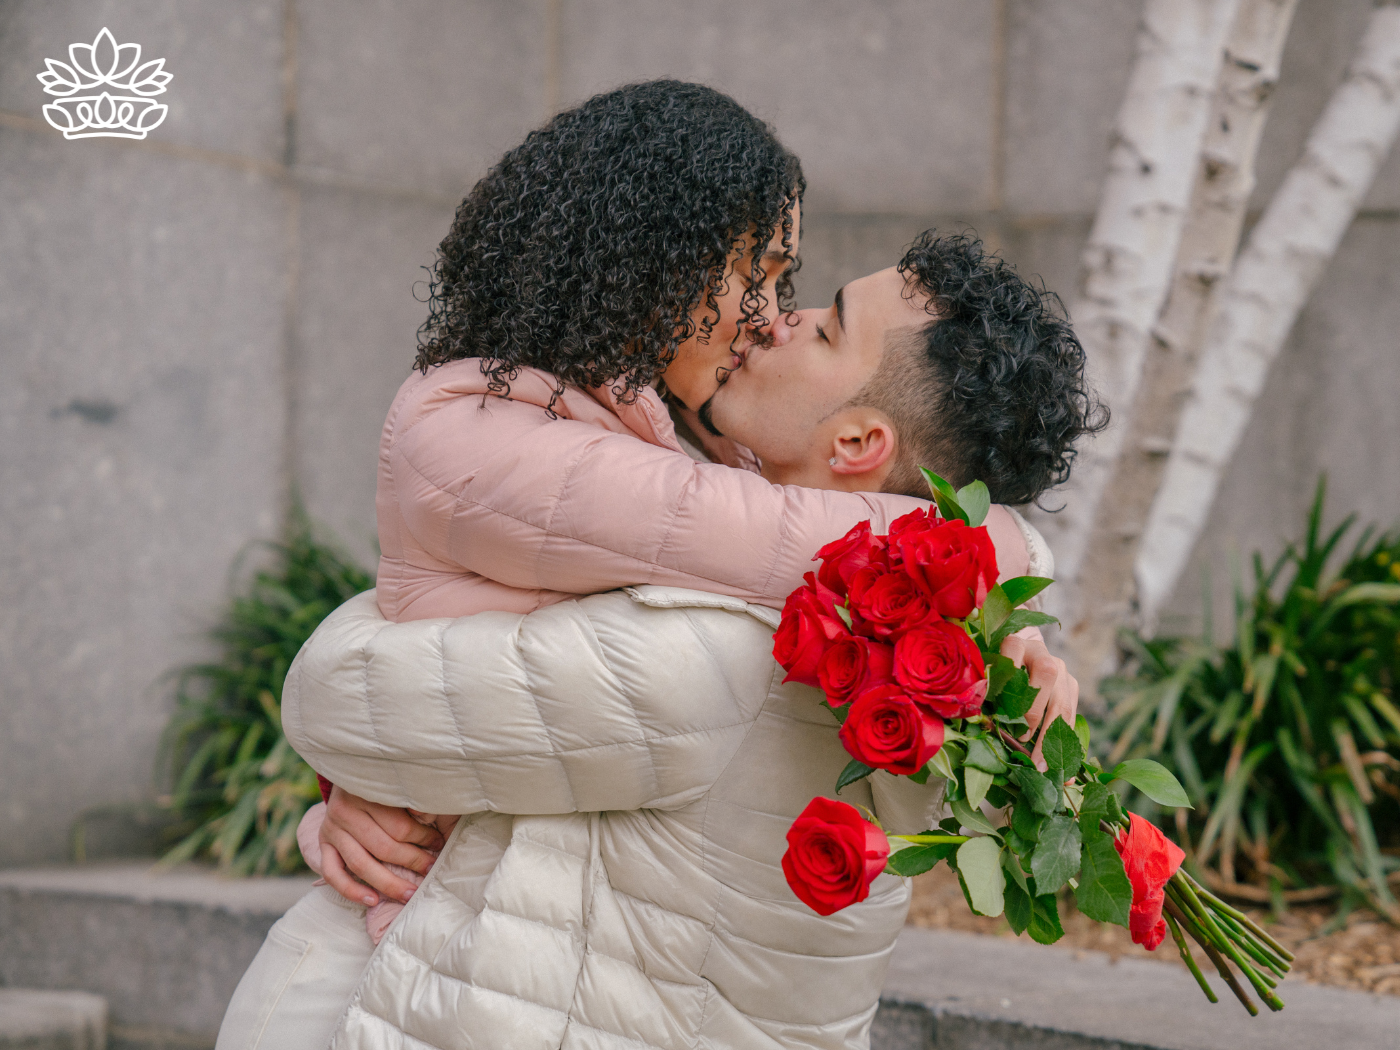 A couple embracing with a bouquet of red roses in hand - Fabulous Flowers and Gifts, All Fabulous Flowers and Gift Boxes.